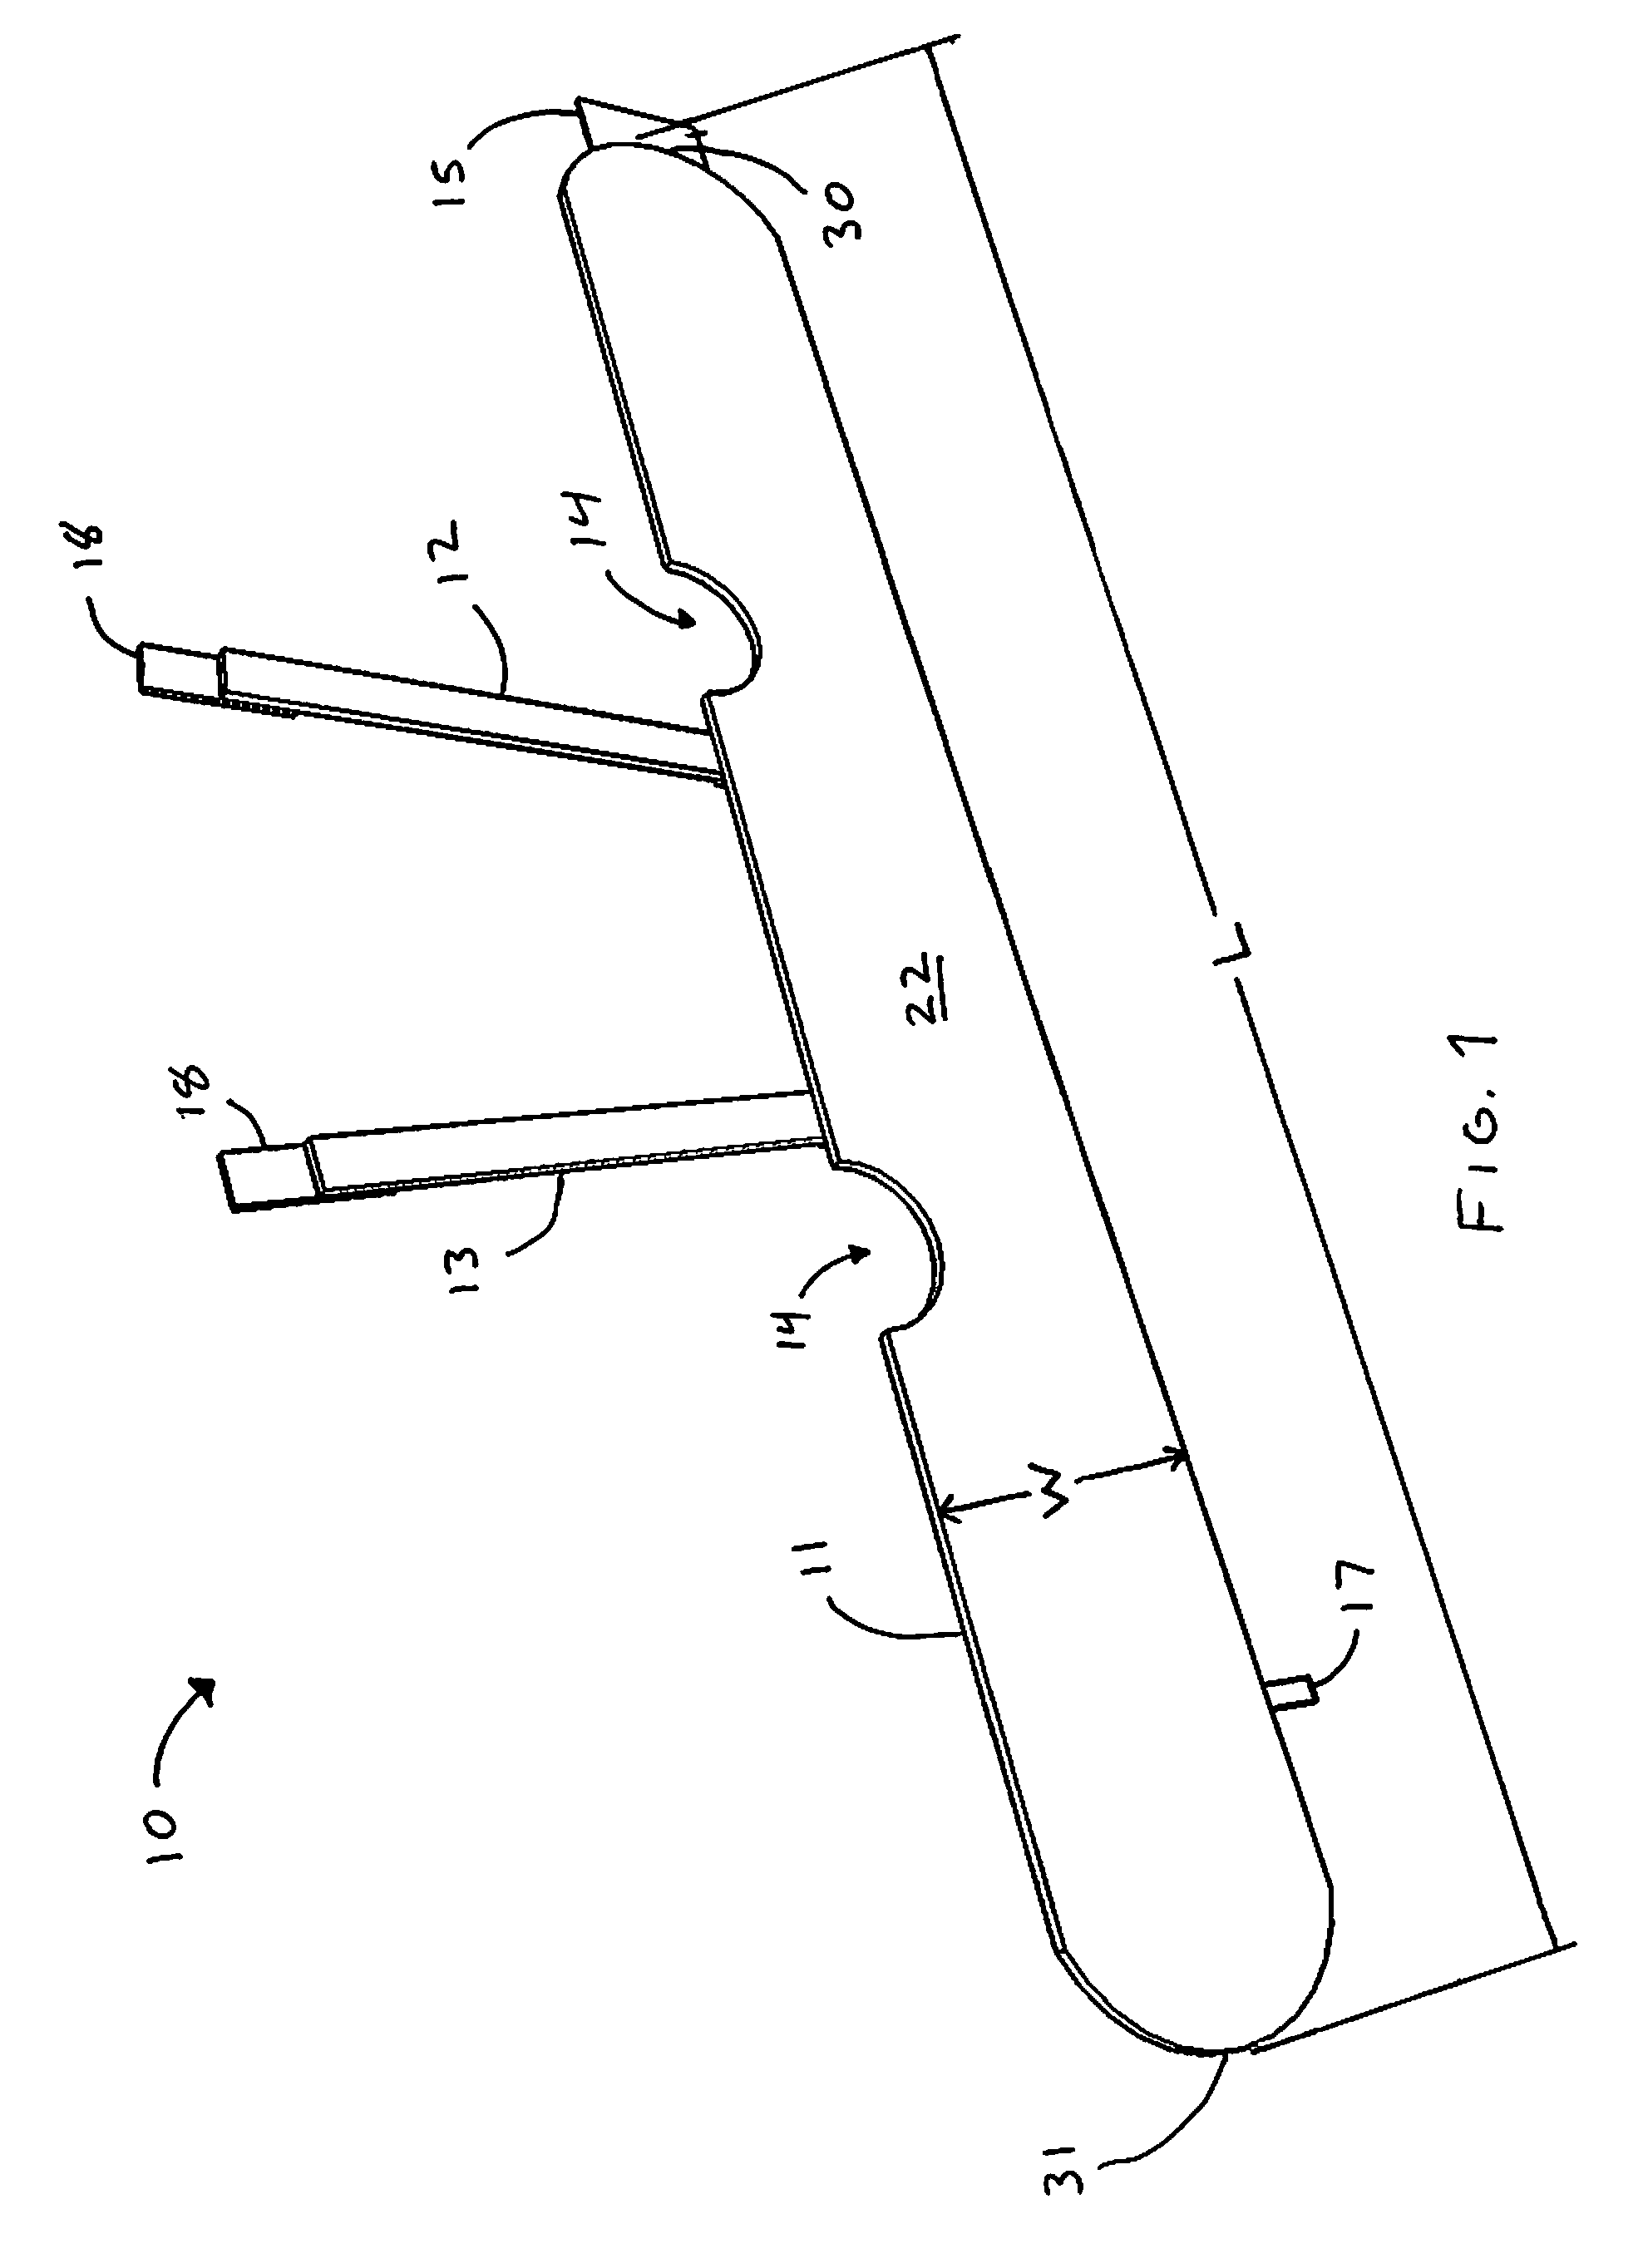 Device and Methods for Accessory Chest Muscle Development